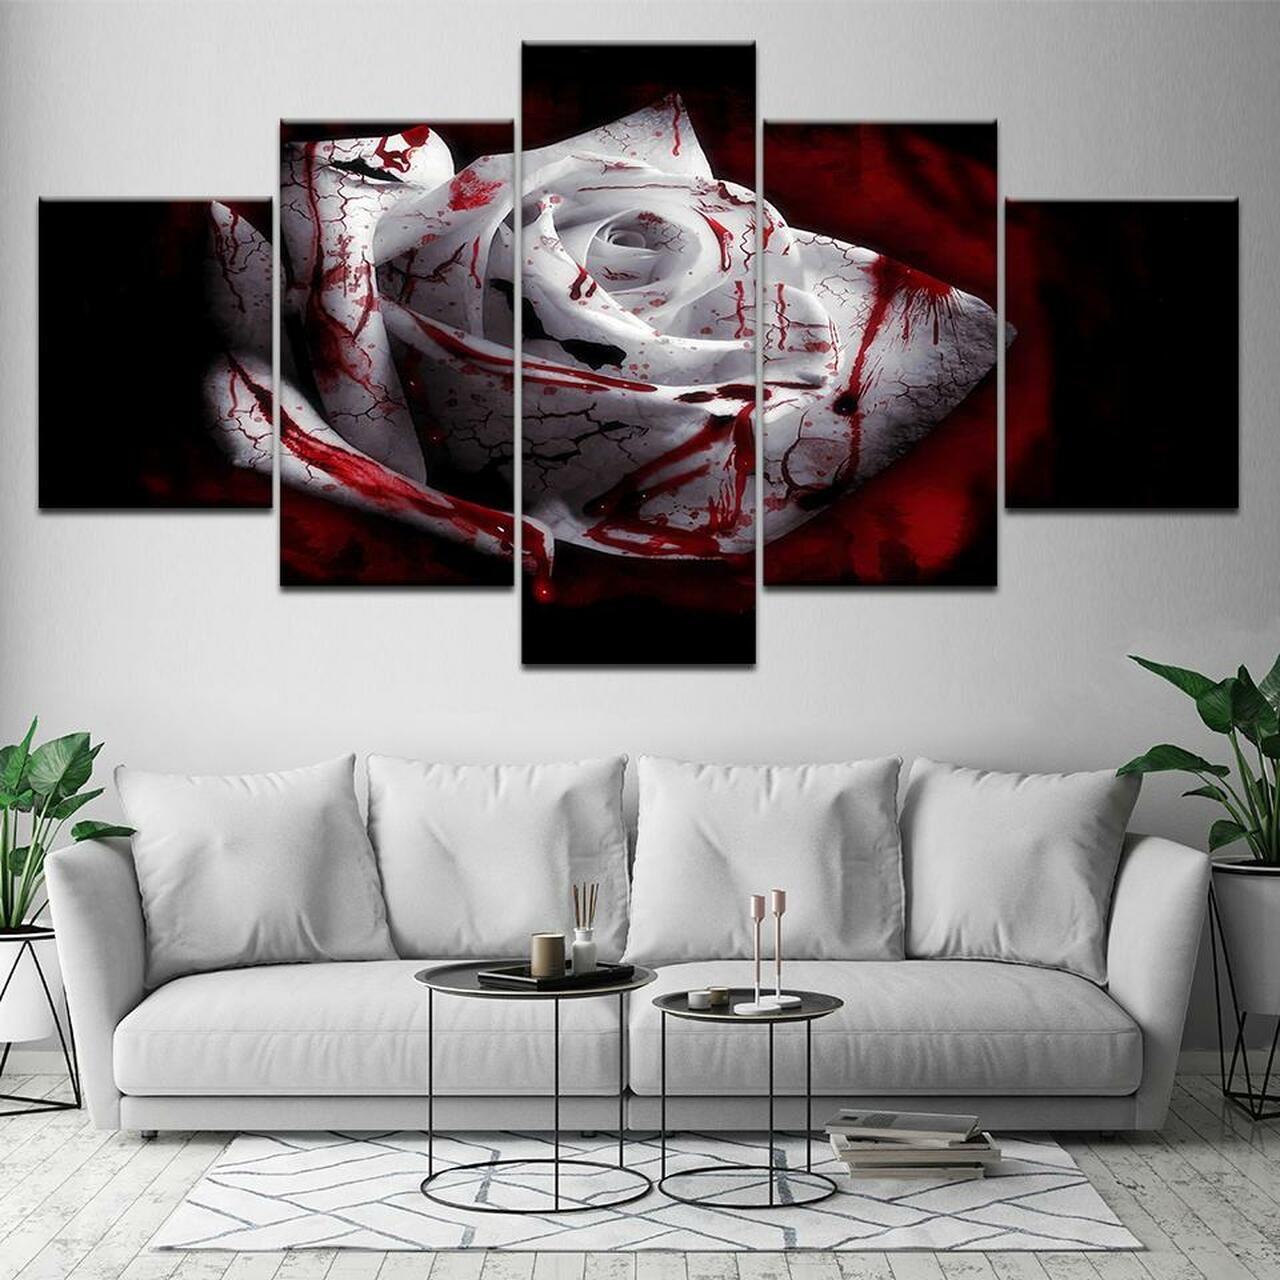 Bloody White Rose 5 Piece Canvas Art Wall Decor